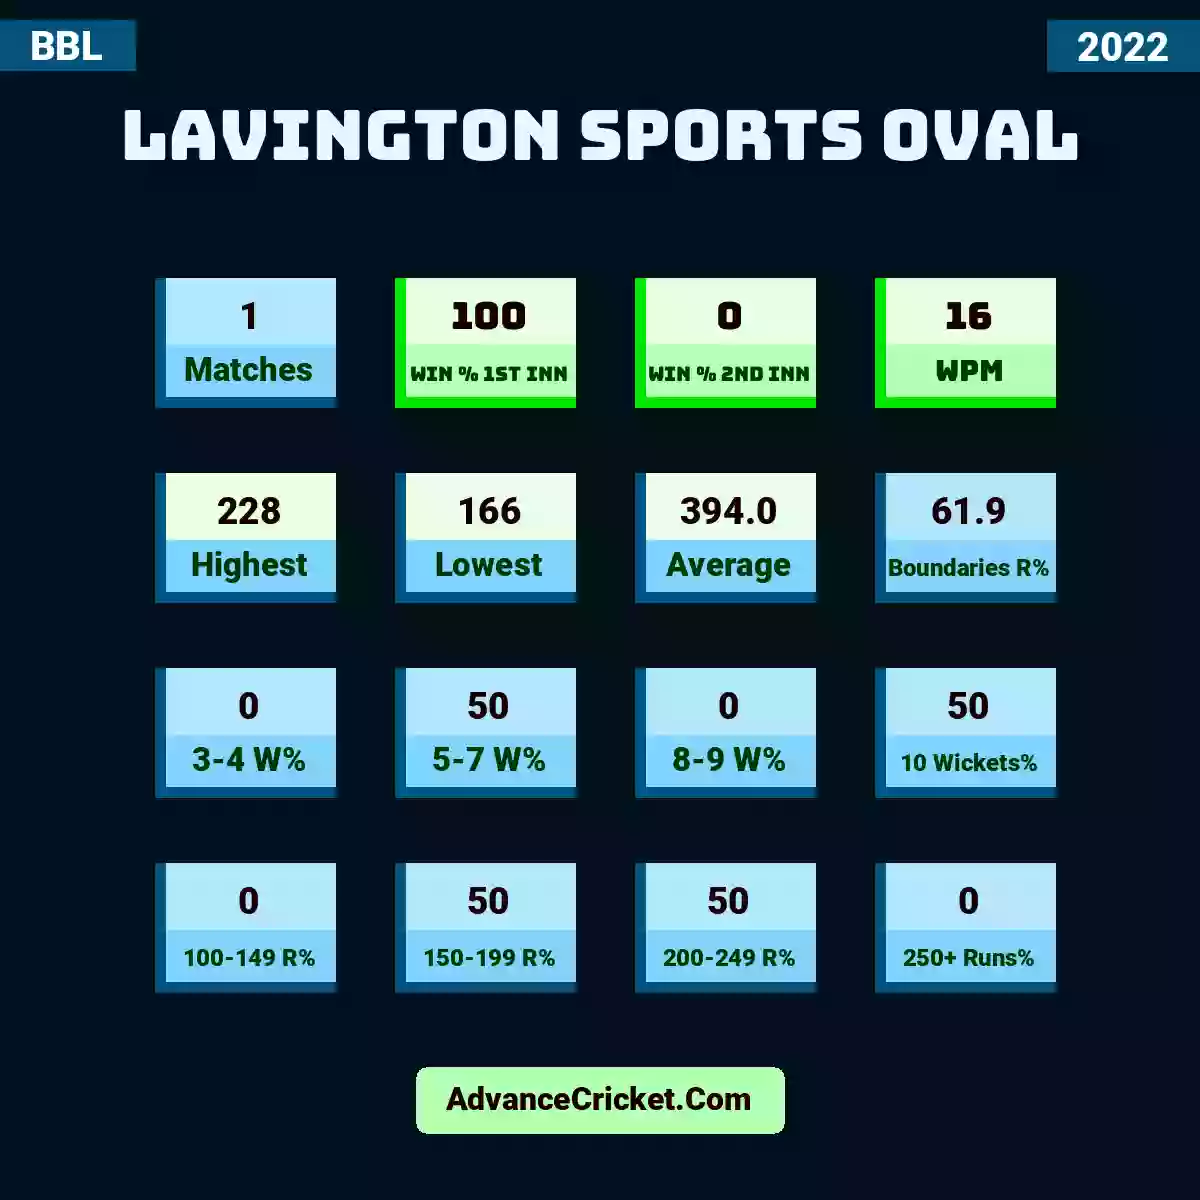 Image showing Lavington Sports Oval with Matches: 1, Win % 1st Inn: 100, Win % 2nd Inn: 0, WPM: 16, Highest: 228, Lowest: 166, Average: 394.0, Boundaries R%: 61.9, 3-4 W%: 0, 5-7 W%: 50, 8-9 W%: 0, 10 Wickets%: 50, 100-149 R%: 0, 150-199 R%: 50, 200-249 R%: 50, 250+ Runs%: 0.